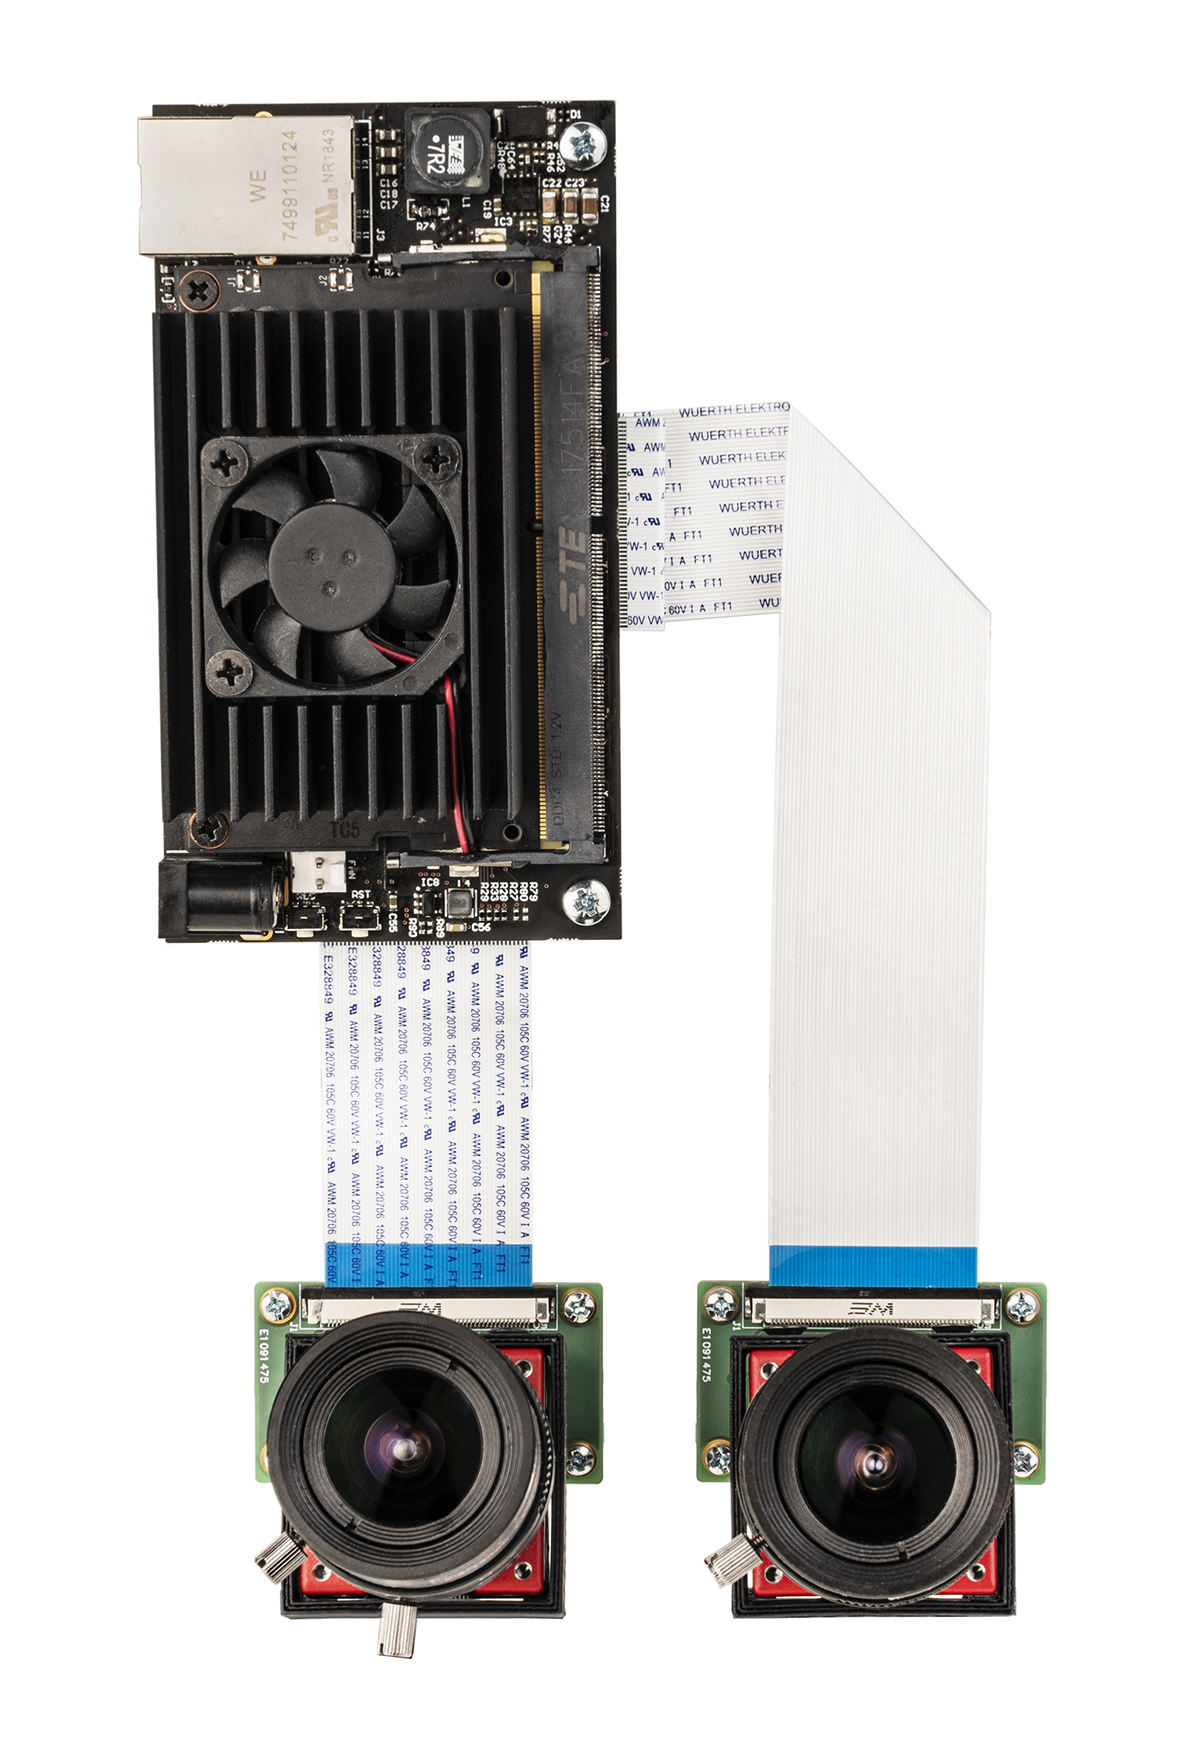 Nvidia Jetson Nano on Antmicro's baseboard with Allied Vision's Alvium cameras